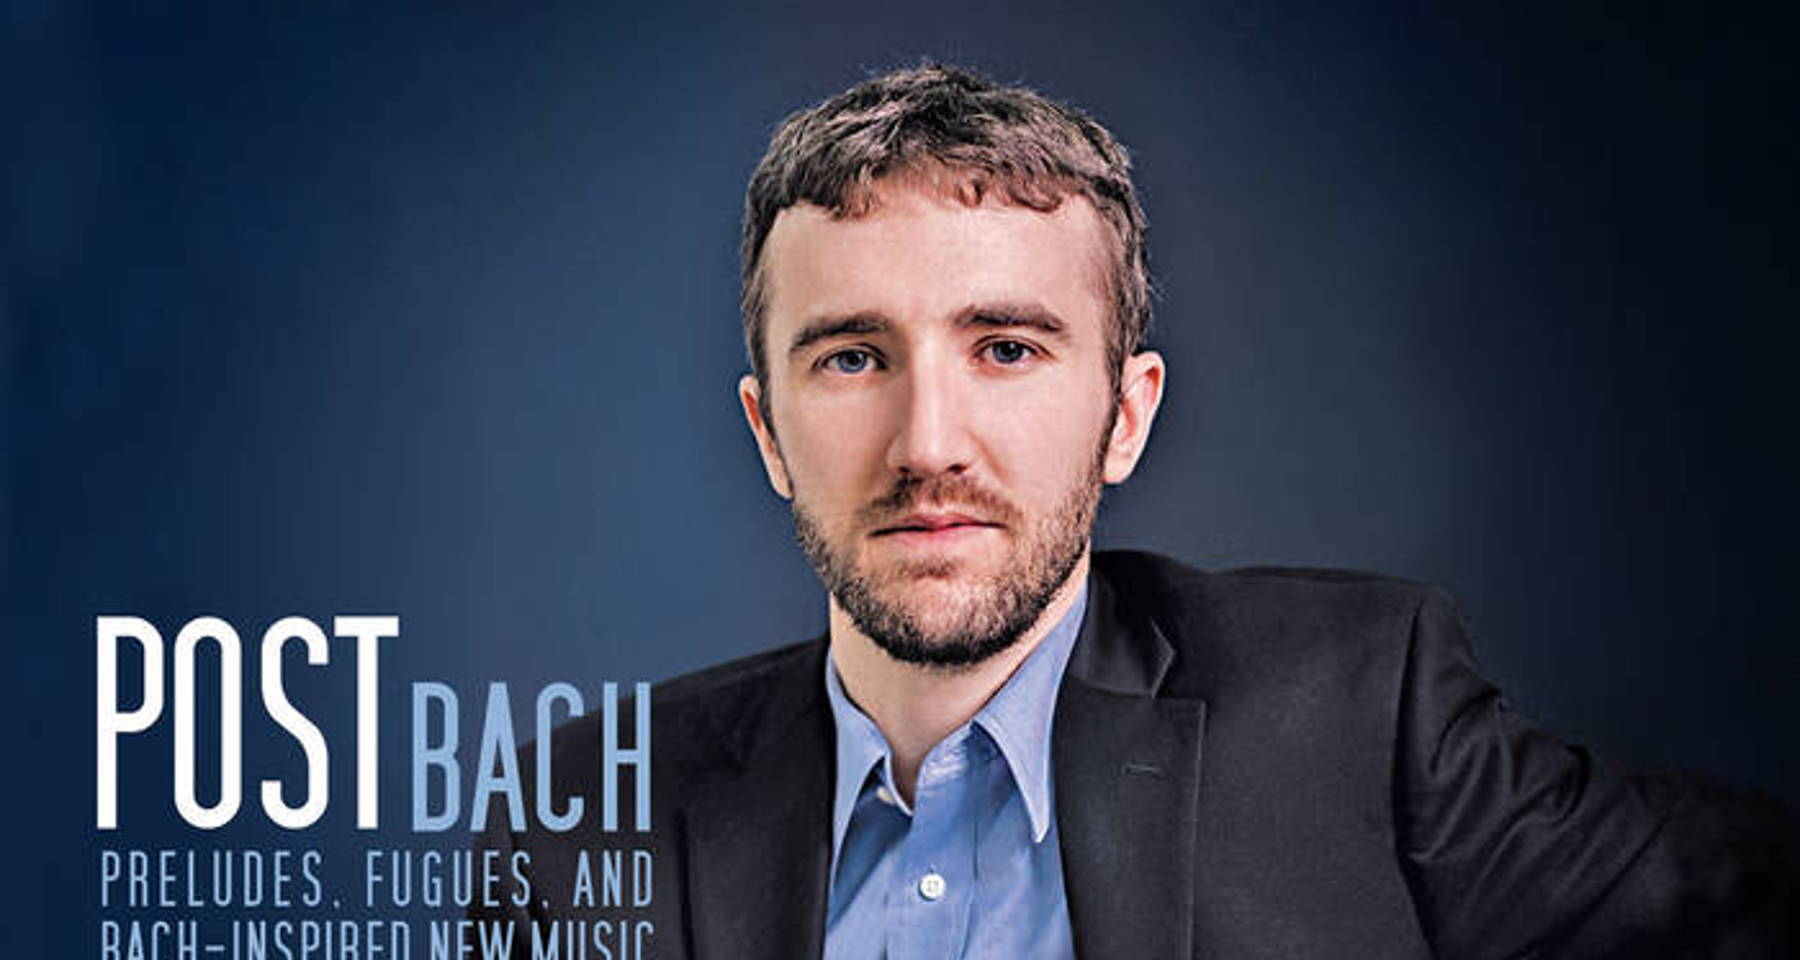 Post Bach - [Delayed] CD Release Concert!